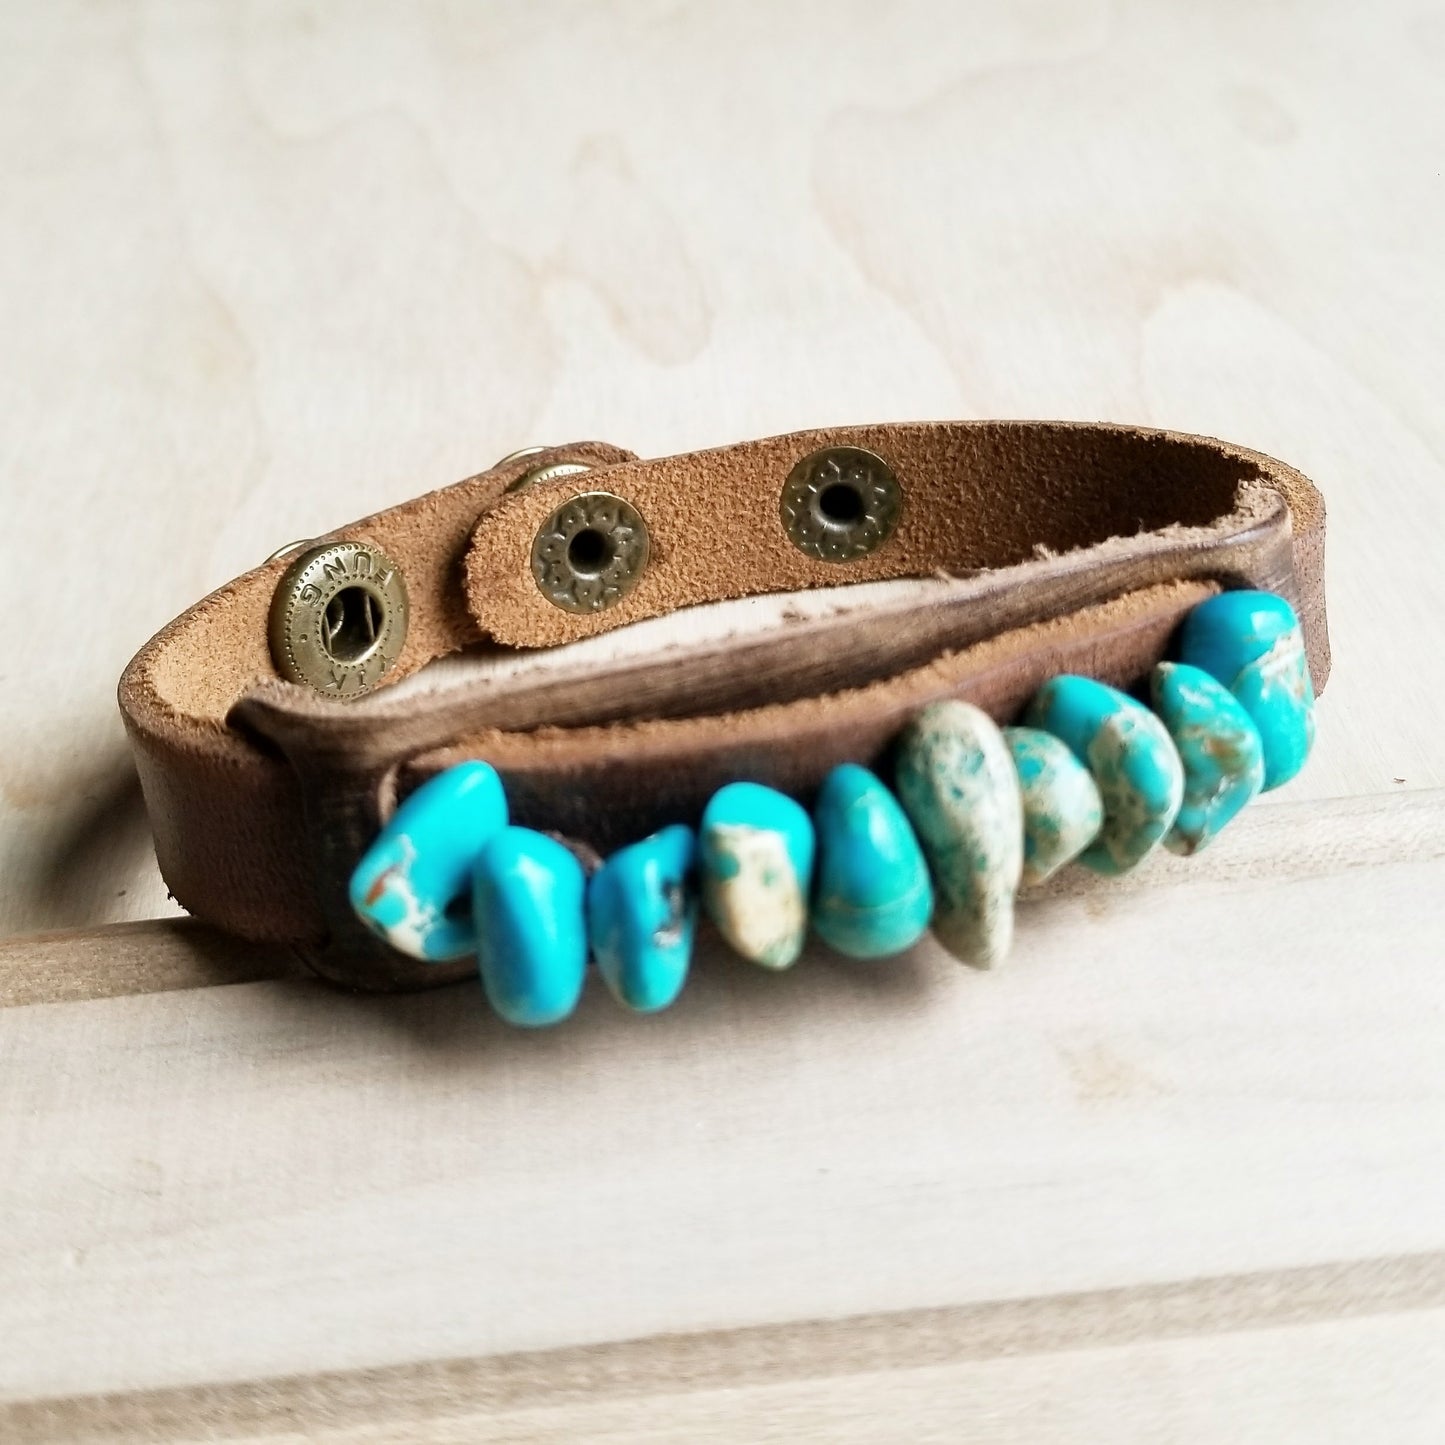 Dusty Leather Narrow Cuff with Turquoise Regalite Stones 006v - The Jewelry Junkie